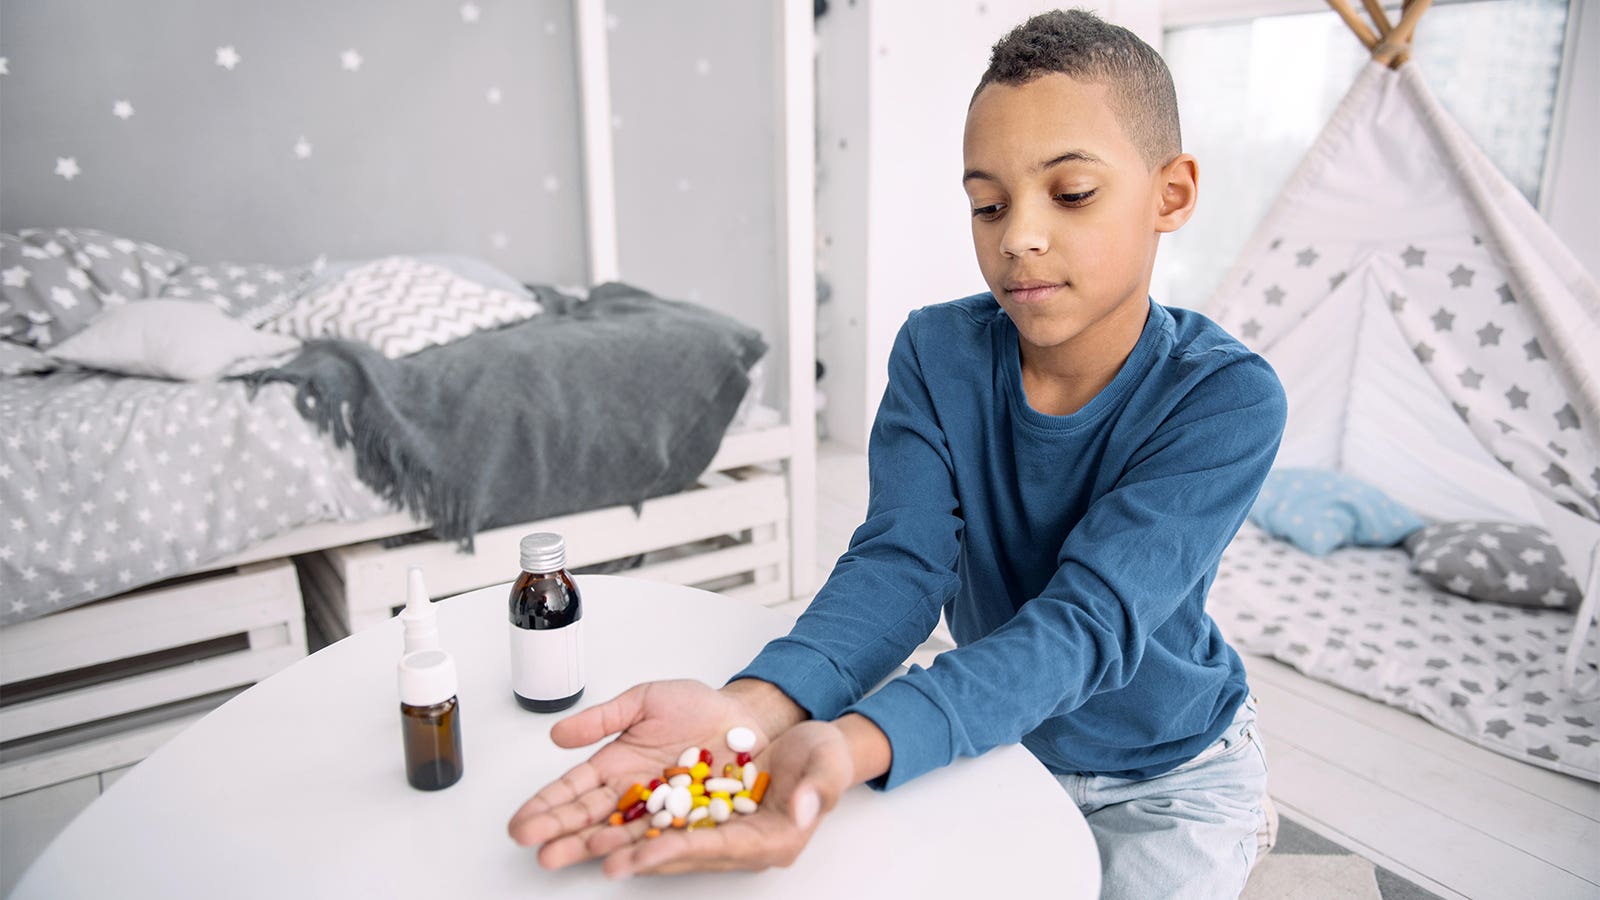 Polypharmacy Isn’t the Answer for Childhood Mental Health